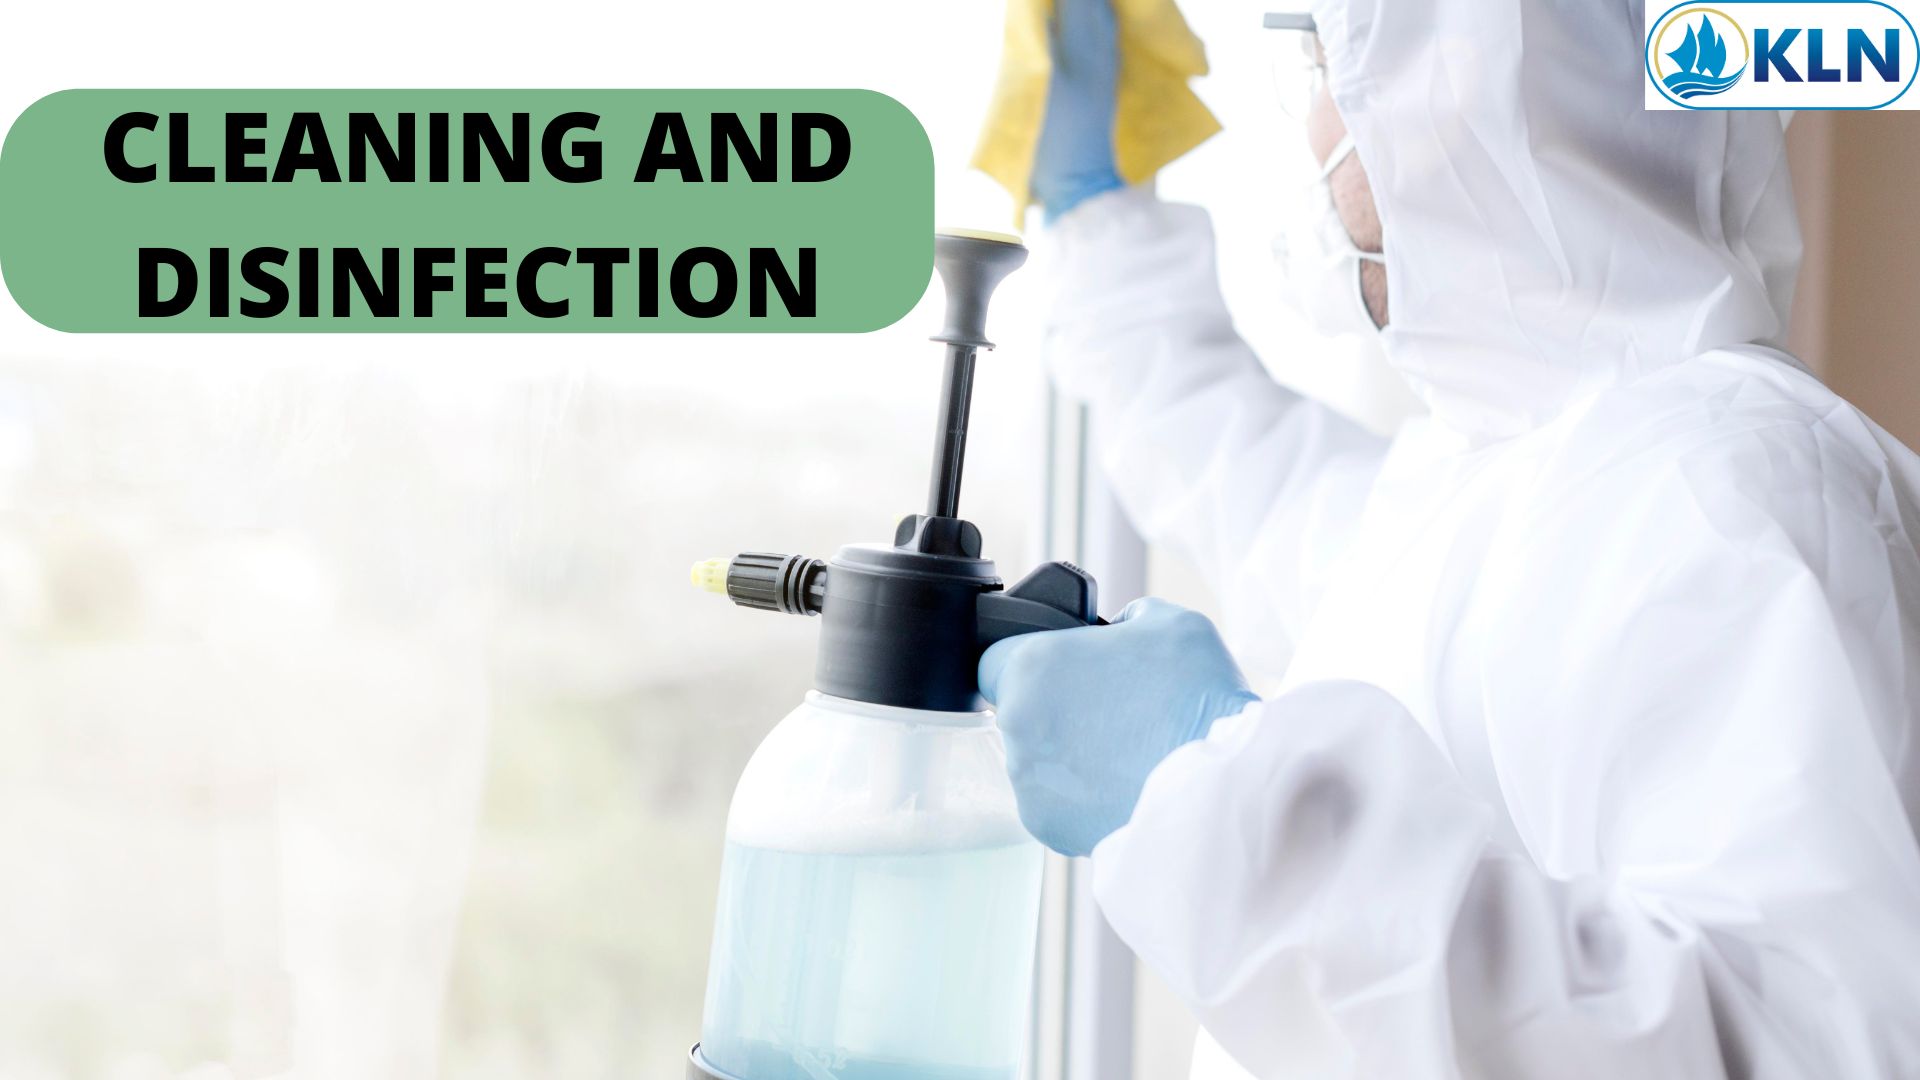 CLEANING AND DISINFECTION 